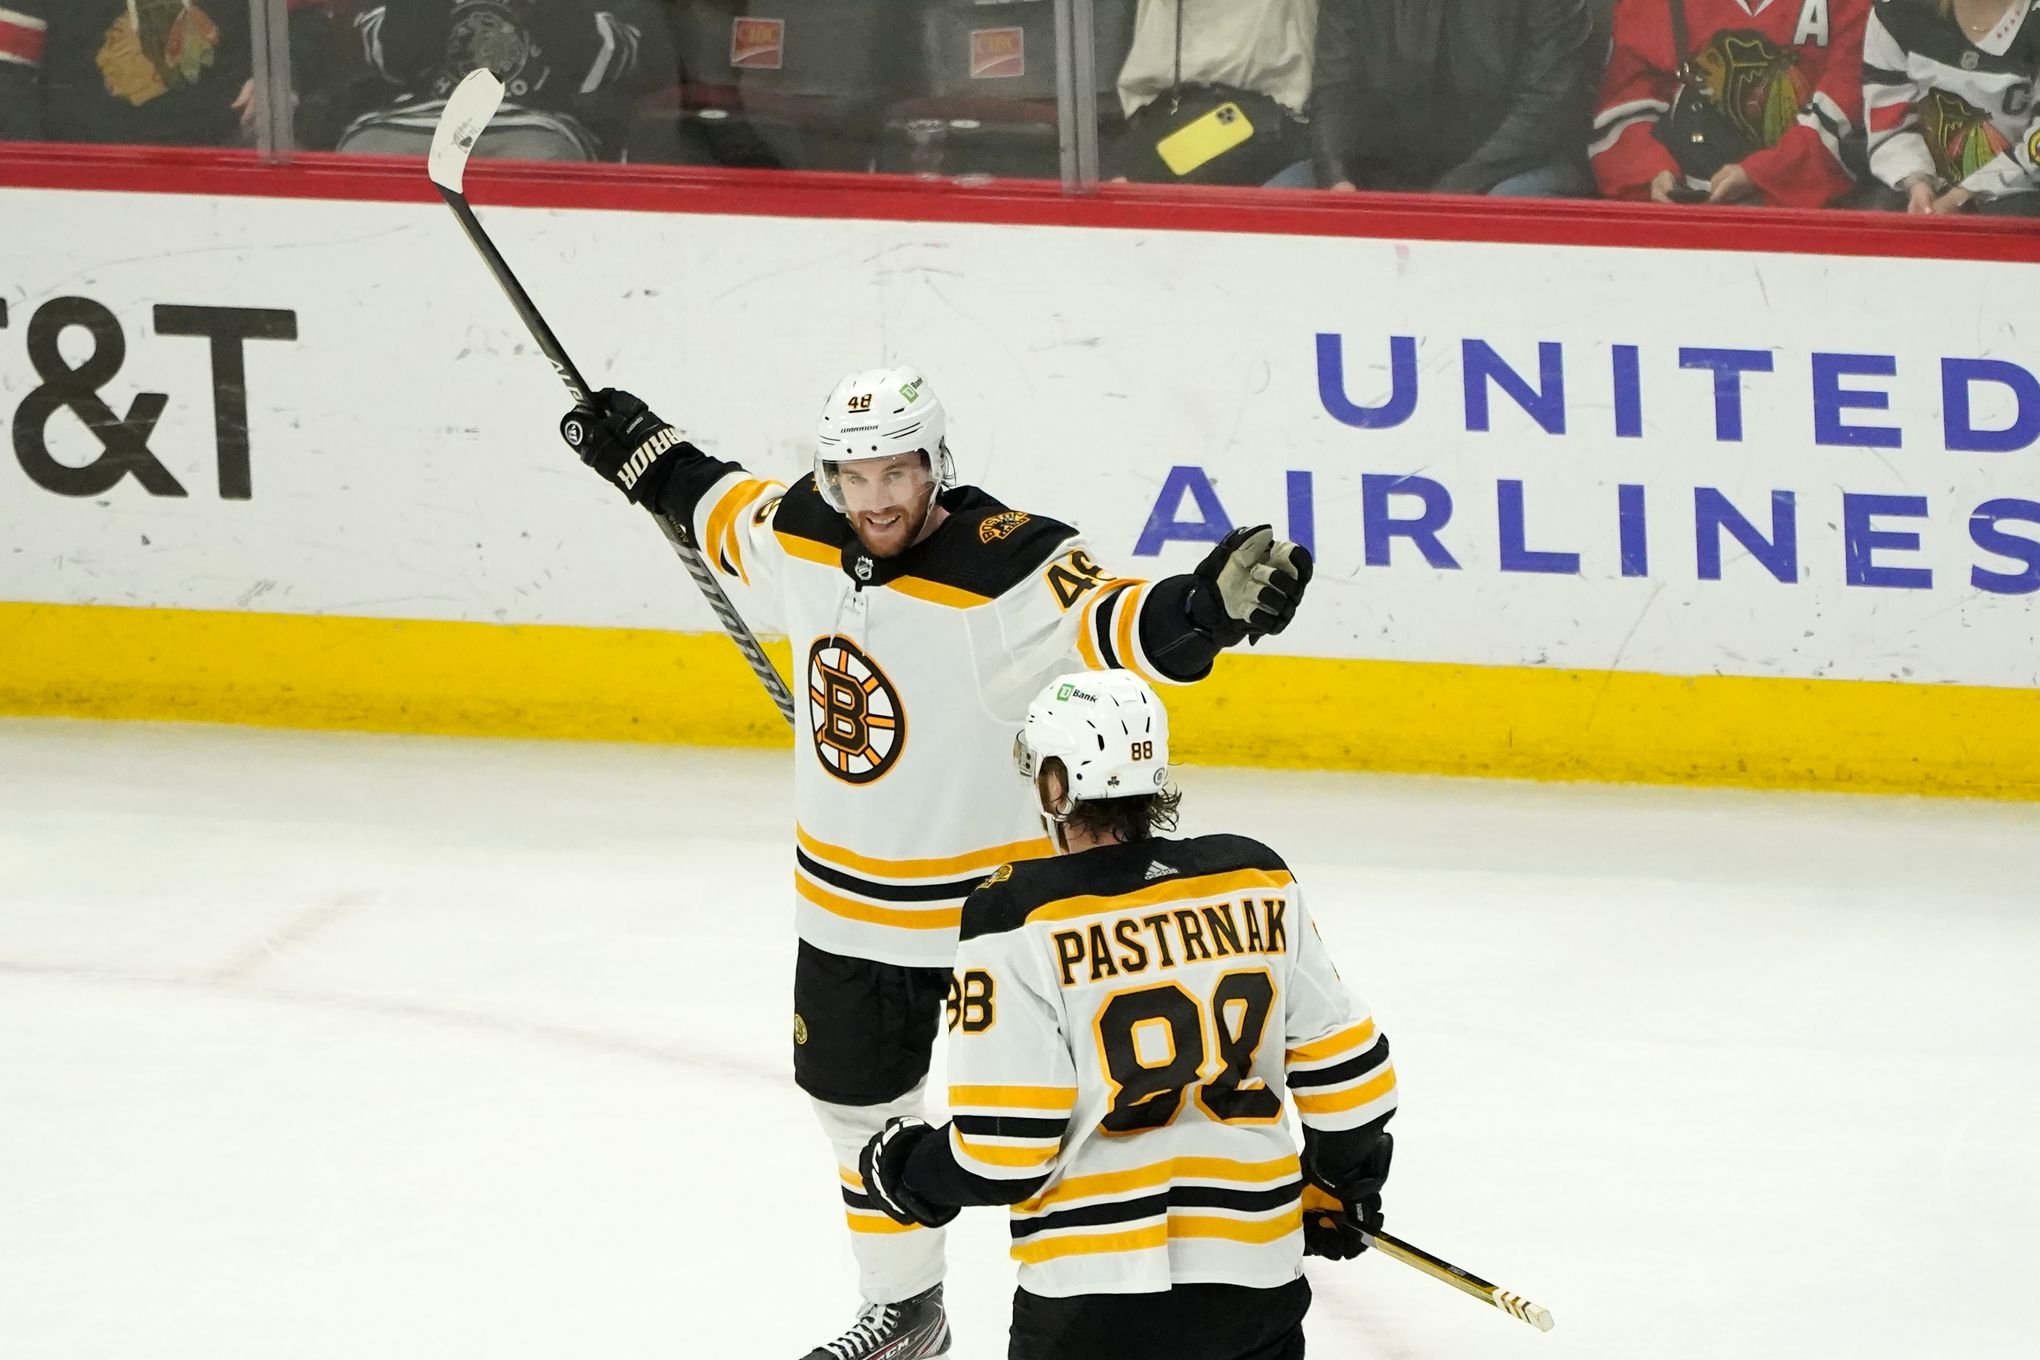 Taylor Hall scores in overtime as Bruins beat Wild